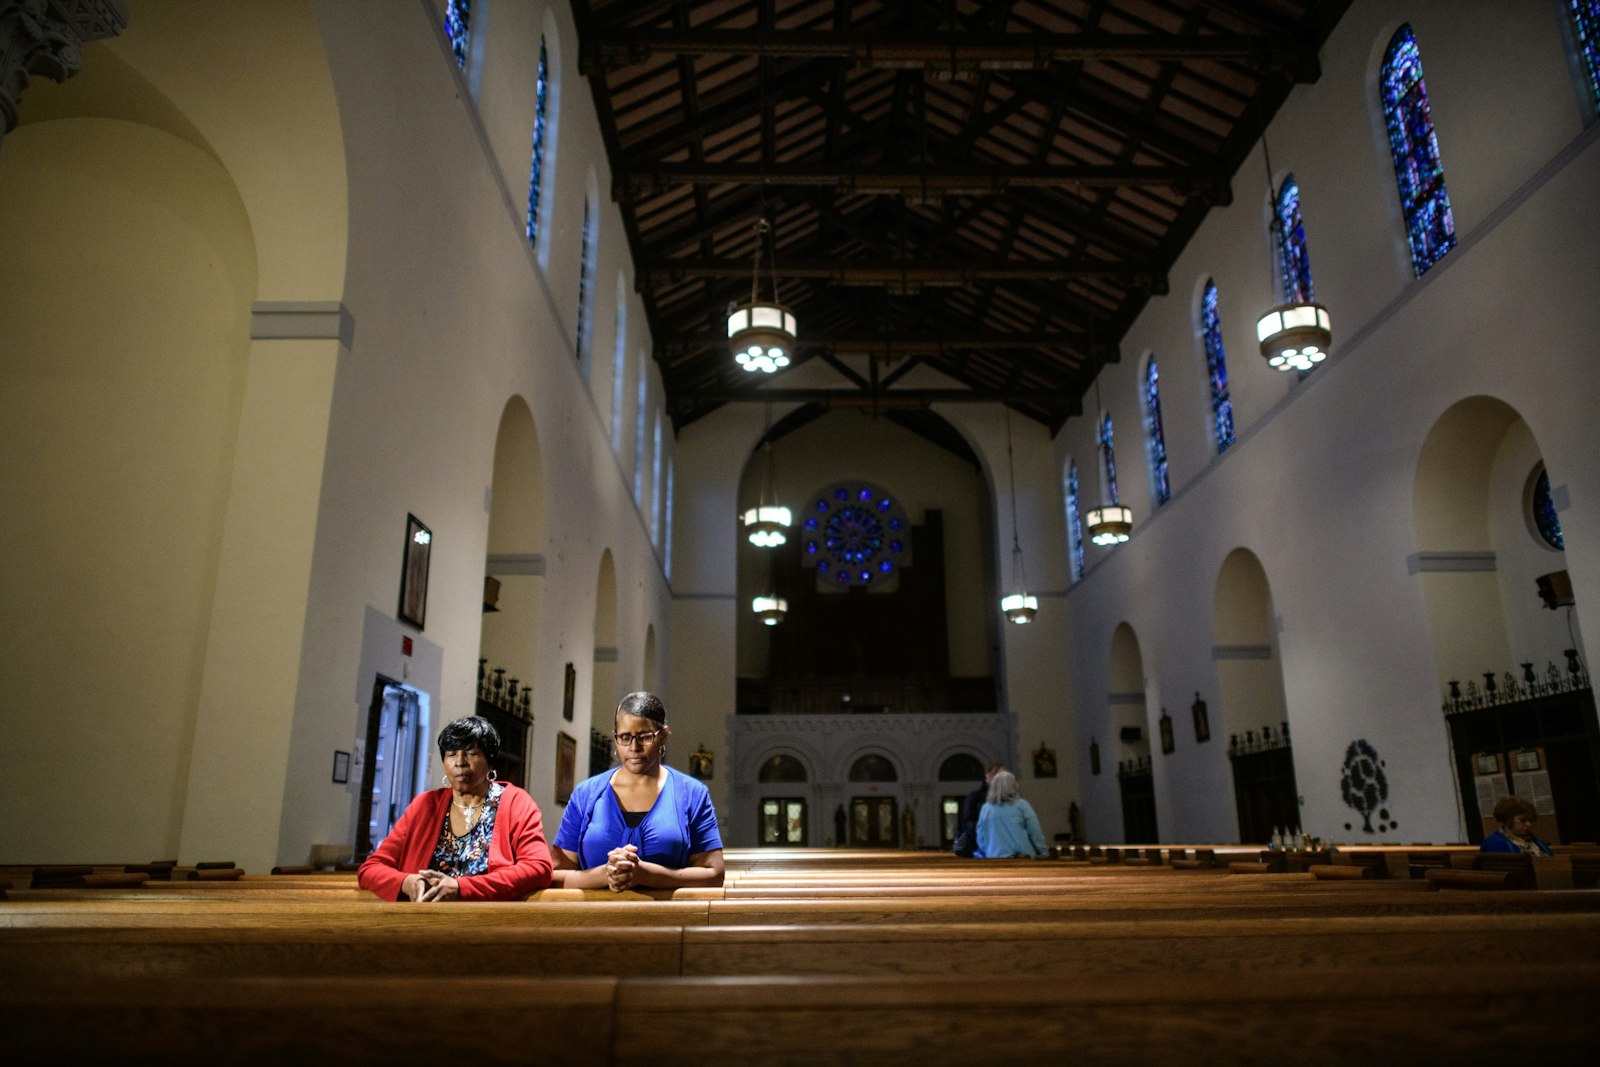 Two women pray inside St. Charles Lwanga Parish in this 2019 file photo. The historic parish offers critical services in its community, including a partnership with Ceciliaville, a nonprofit providing community programs and services, as well as an outlet to play basketball for Detroit youths.